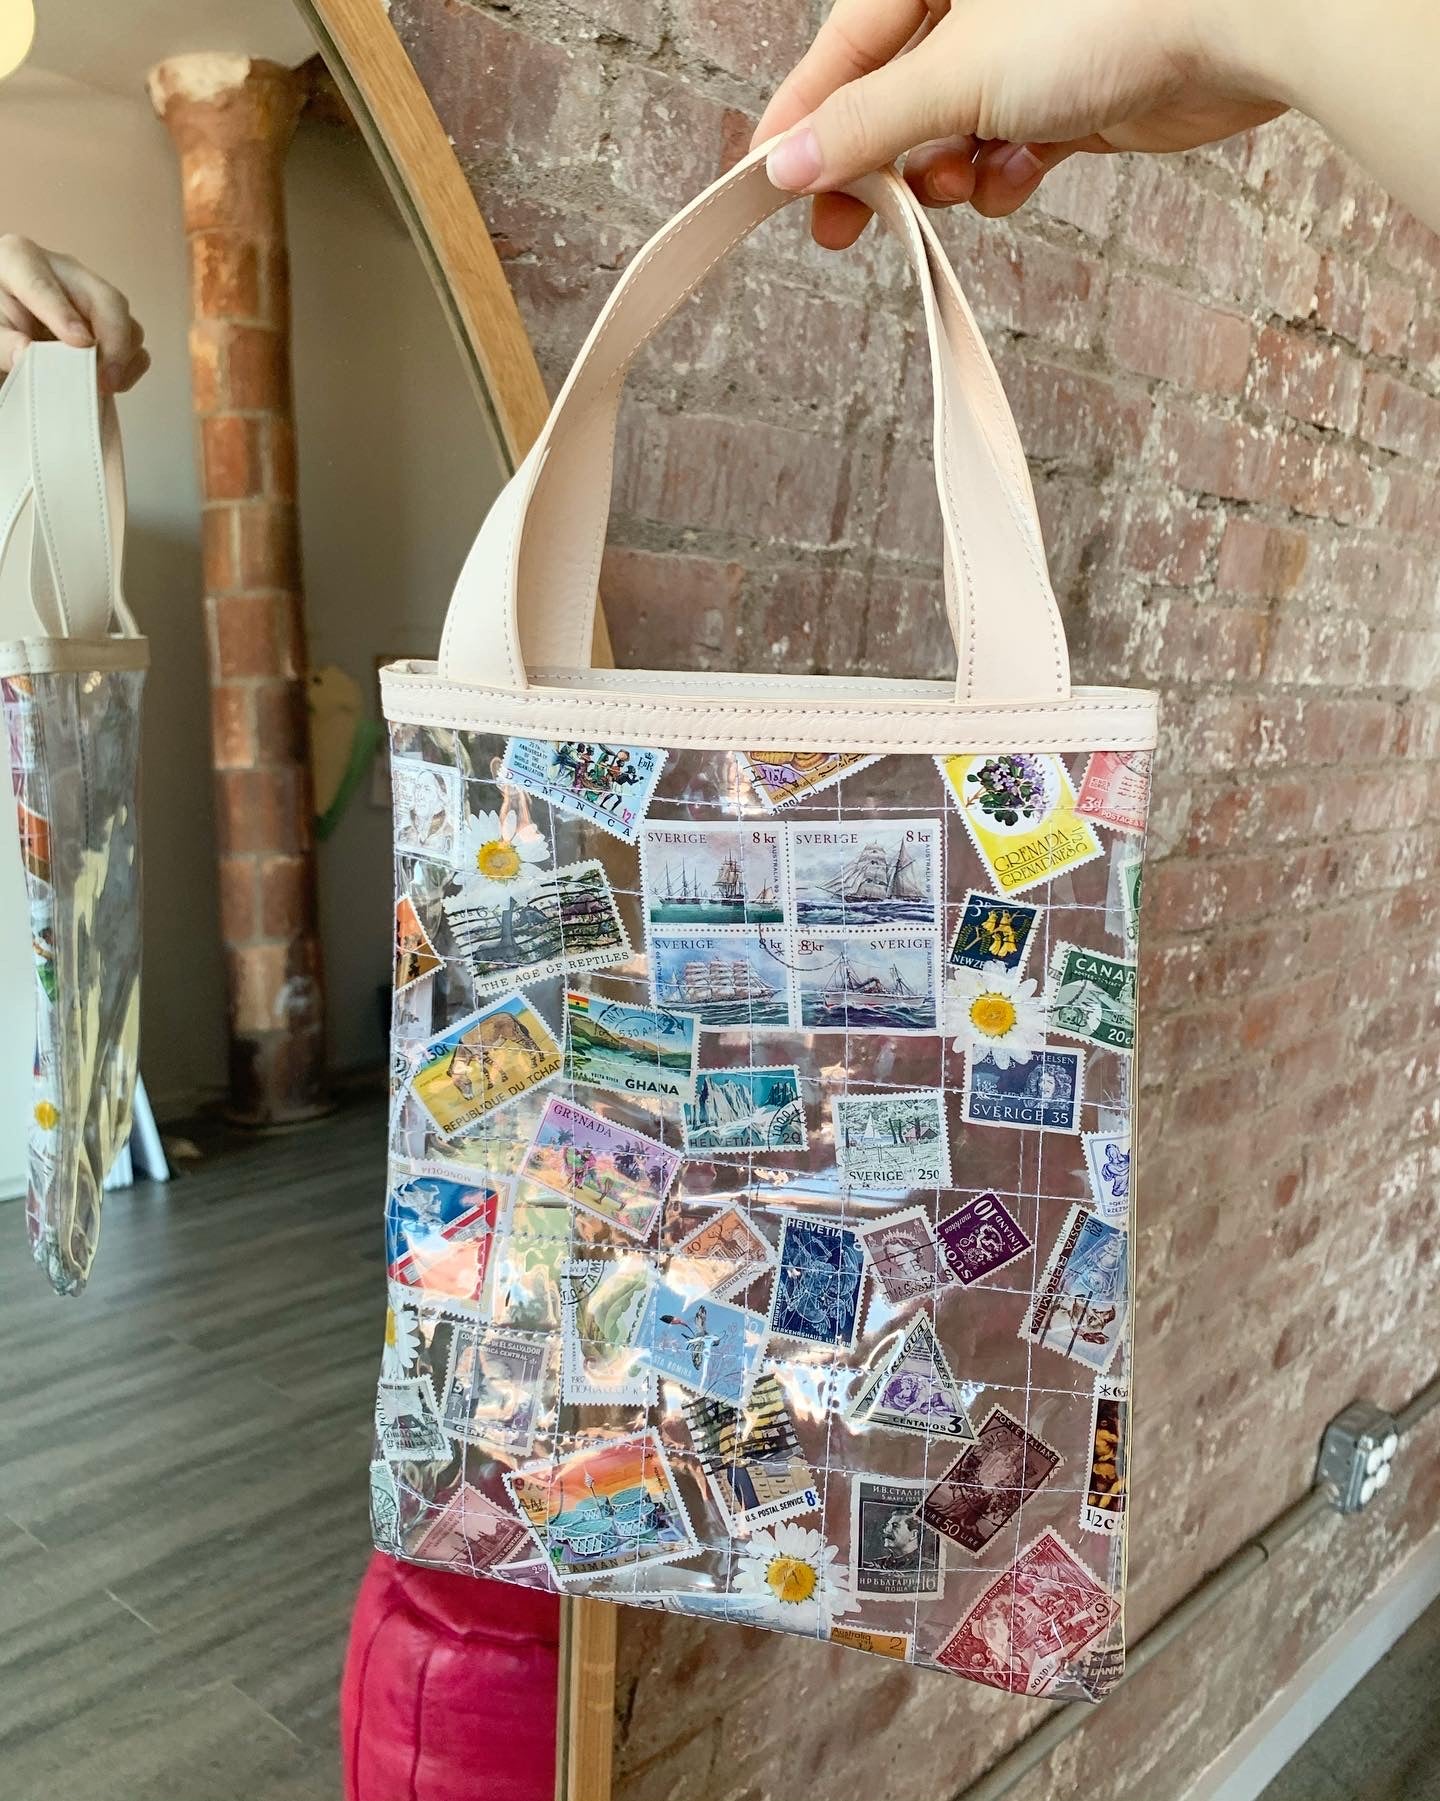 Baby Stamp Quilt Tote – Dauphinette